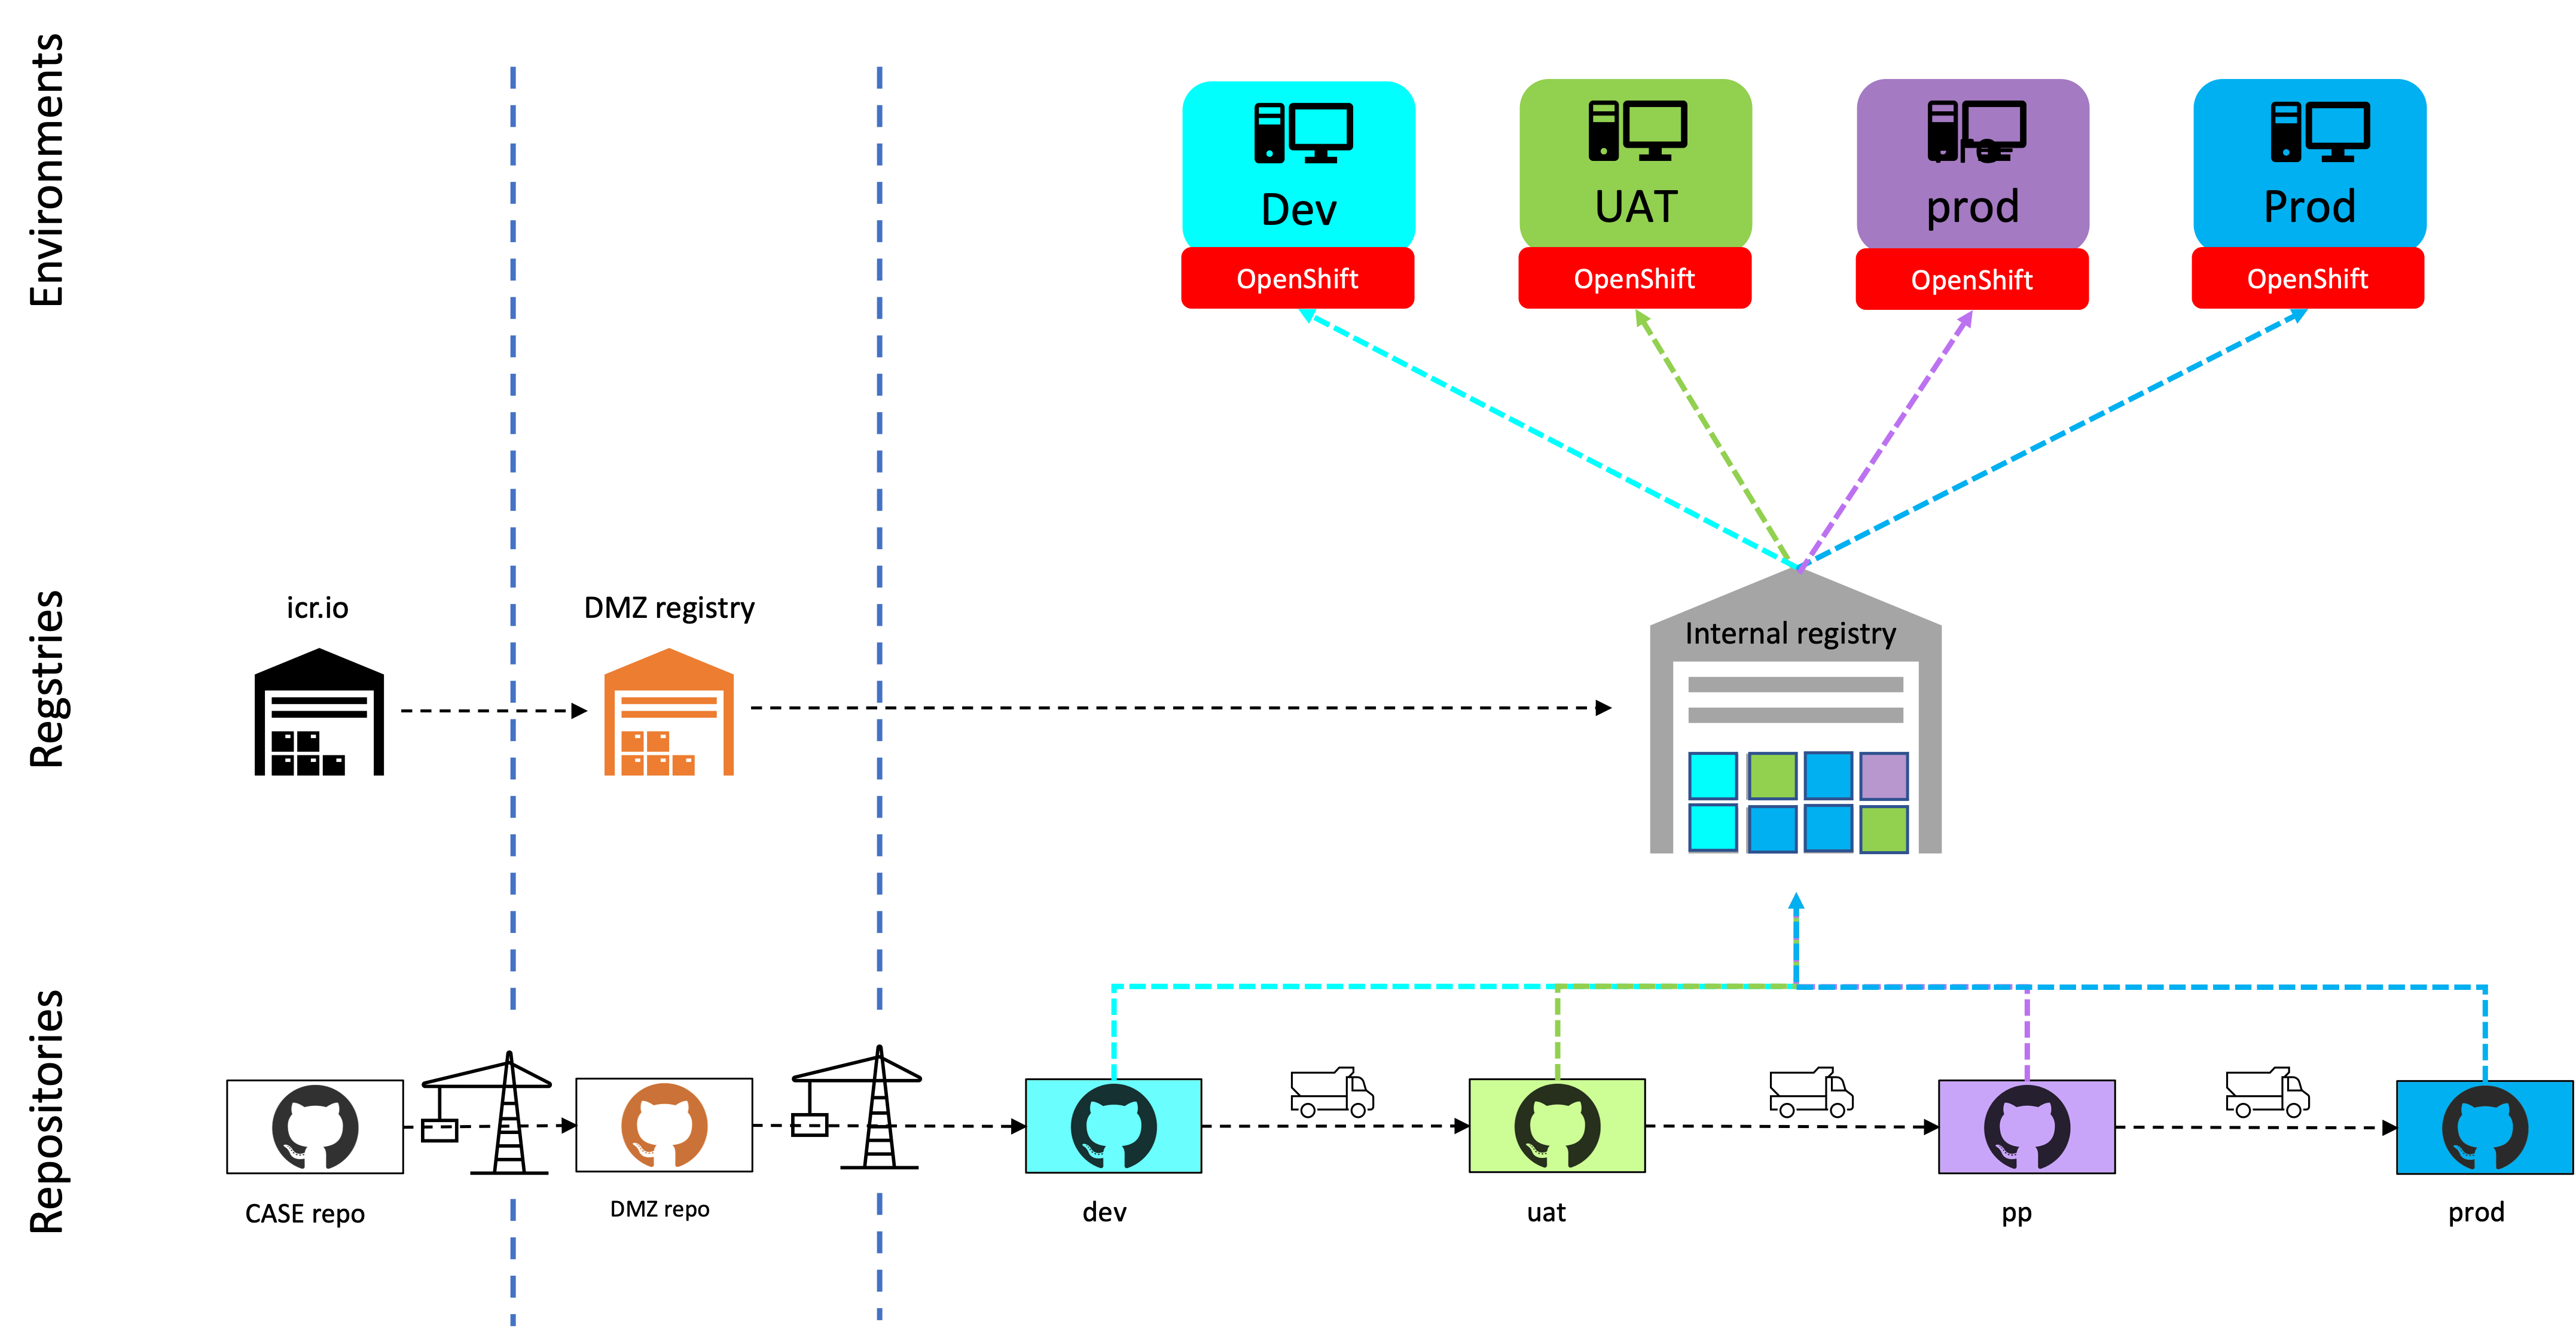 Governed Process with Continuous Adoption